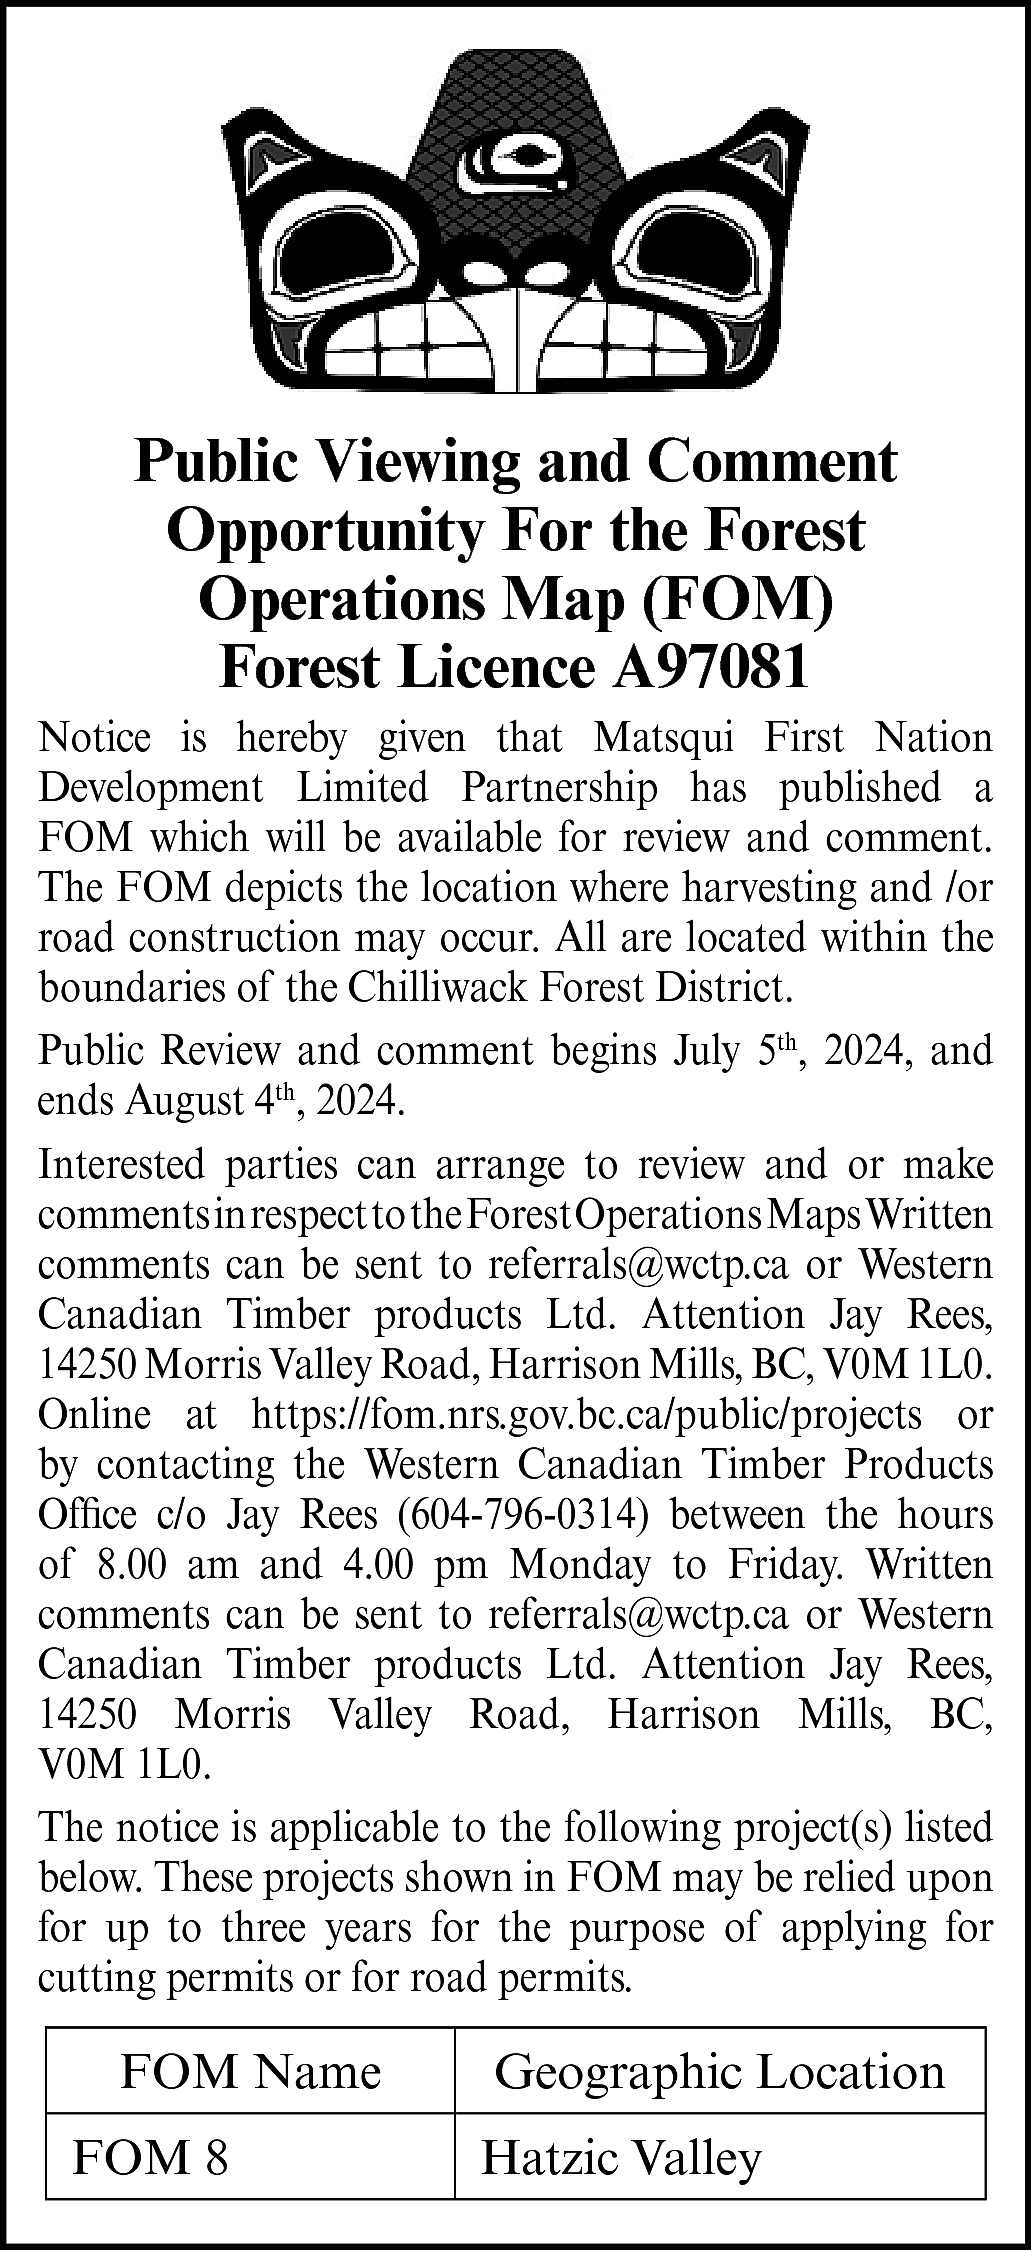 Public Viewing and Comment <br>Opportunity  Public Viewing and Comment  Opportunity For the Forest  Operations Map (FOM)  Forest Licence A97081  Notice is hereby given that Matsqui First Nation  Development Limited Partnership has published a  FOM which will be available for review and comment.  The FOM depicts the location where harvesting and /or  road construction may occur. All are located within the  boundaries of the Chilliwack Forest District.  Public Review and comment begins July 5th, 2024, and  ends August 4th, 2024.  Interested parties can arrange to review and or make  commentsinrespecttotheForestOperationsMapsWritten  comments can be sent to referrals@wctp.ca or Western  Canadian Timber products Ltd. Attention Jay Rees,  14250 Morris Valley Road, Harrison Mills, BC, V0M 1L0.  Online at https://fom.nrs.gov.bc.ca/public/projects or  by contacting the Western Canadian Timber Products  Office c/o Jay Rees (604-796-0314) between the hours  of 8.00 am and 4.00 pm Monday to Friday. Written  comments can be sent to referrals@wctp.ca or Western  Canadian Timber products Ltd. Attention Jay Rees,  14250 Morris Valley Road, Harrison Mills, BC,  V0M 1L0.  The notice is applicable to the following project(s) listed  below. These projects shown in FOM may be relied upon  for up to three years for the purpose of applying for  cutting permits or for road permits.    FOM Name  FOM 8    Geographic Location  Hatzic Valley    